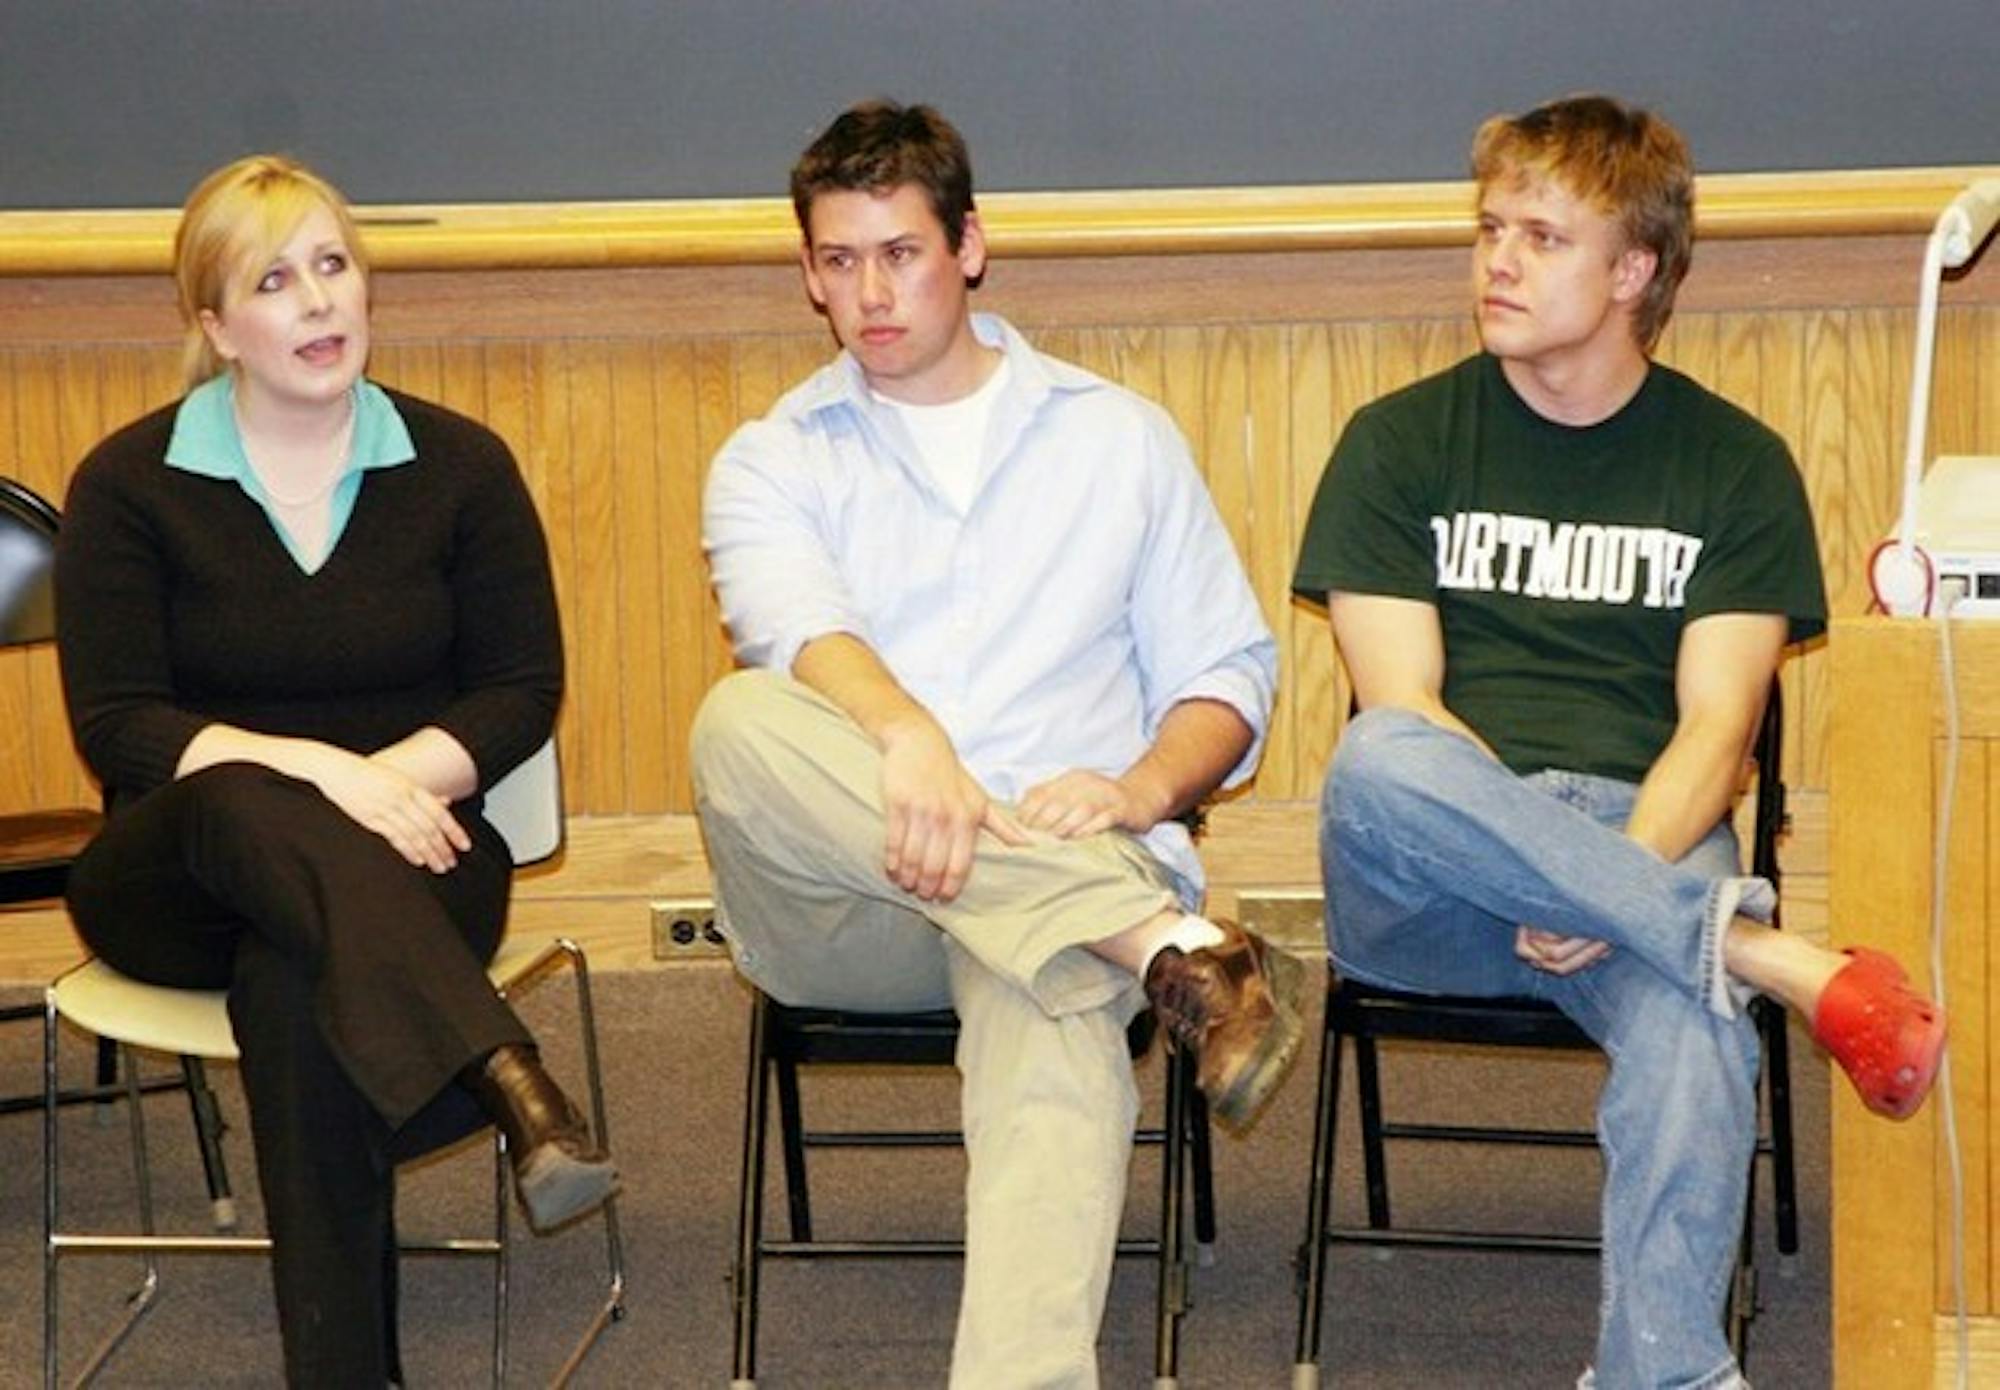 Student Body Presidential candidates, Chrissie Chick '07, Adam Patinkin '07 and Dave Zubricki '07 debated campus issues at Tuesday's Assembly meeting.